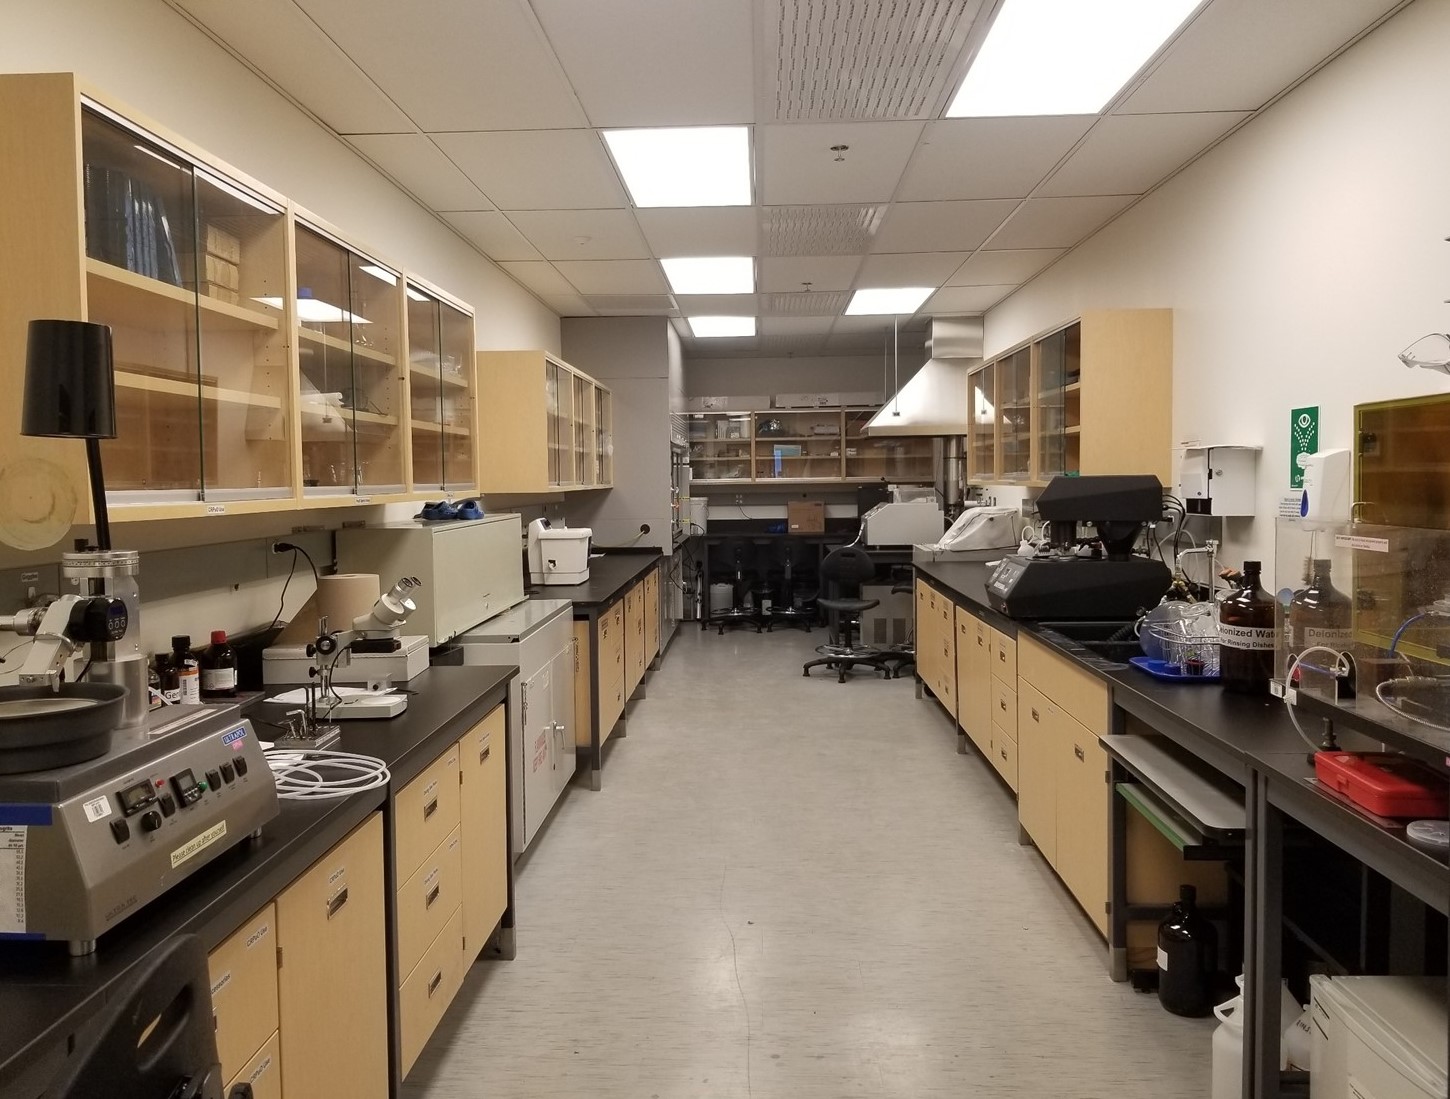 Lab benches along two walls with various lab tools on the benches and cabinets above